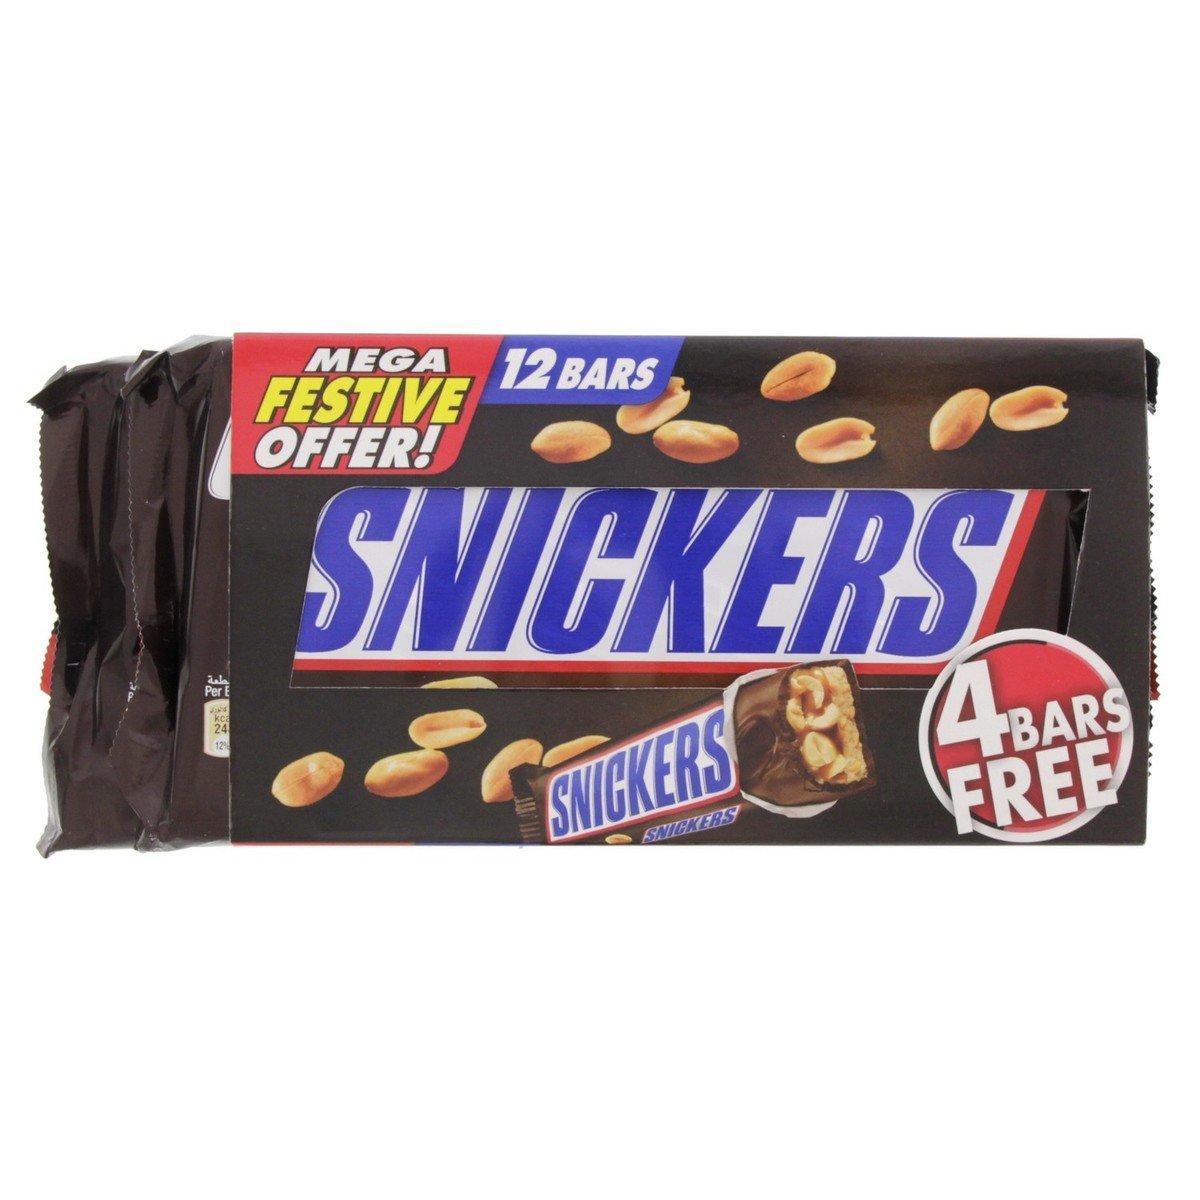 Buy Online SNICKERS Family Pack12 x 50 g - Belgian Shop - Delivery